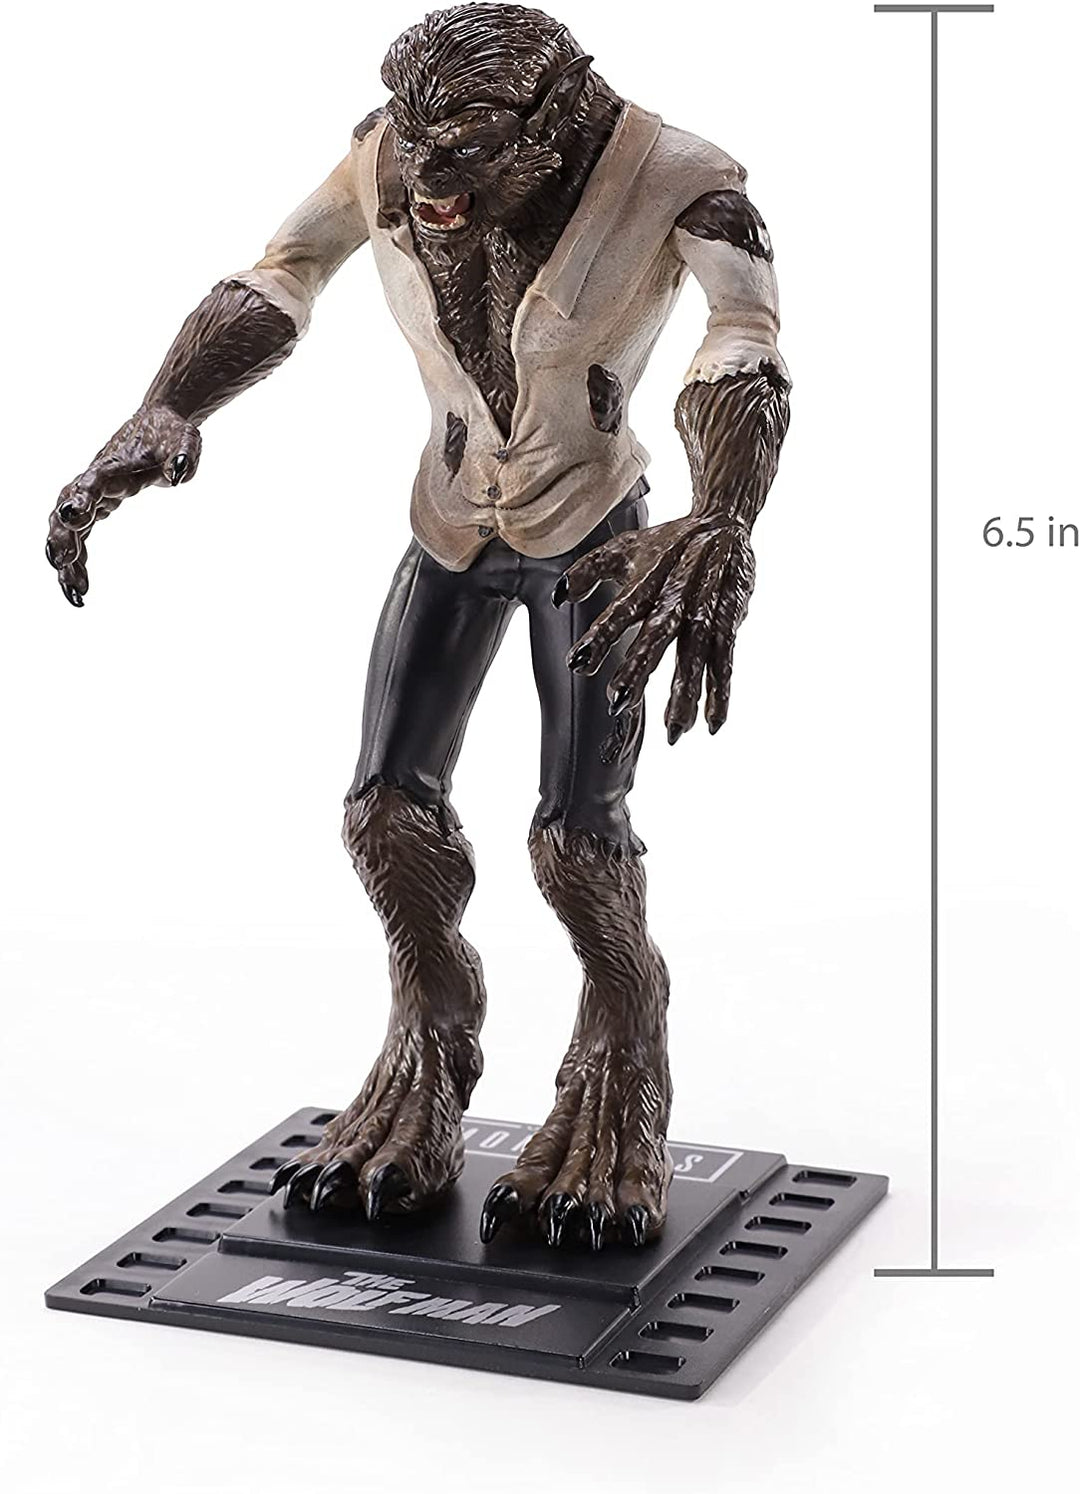 The Noble Collection Universal Monsters Bendyfigs Wolf-Man - 7.5in (19cm) Noble